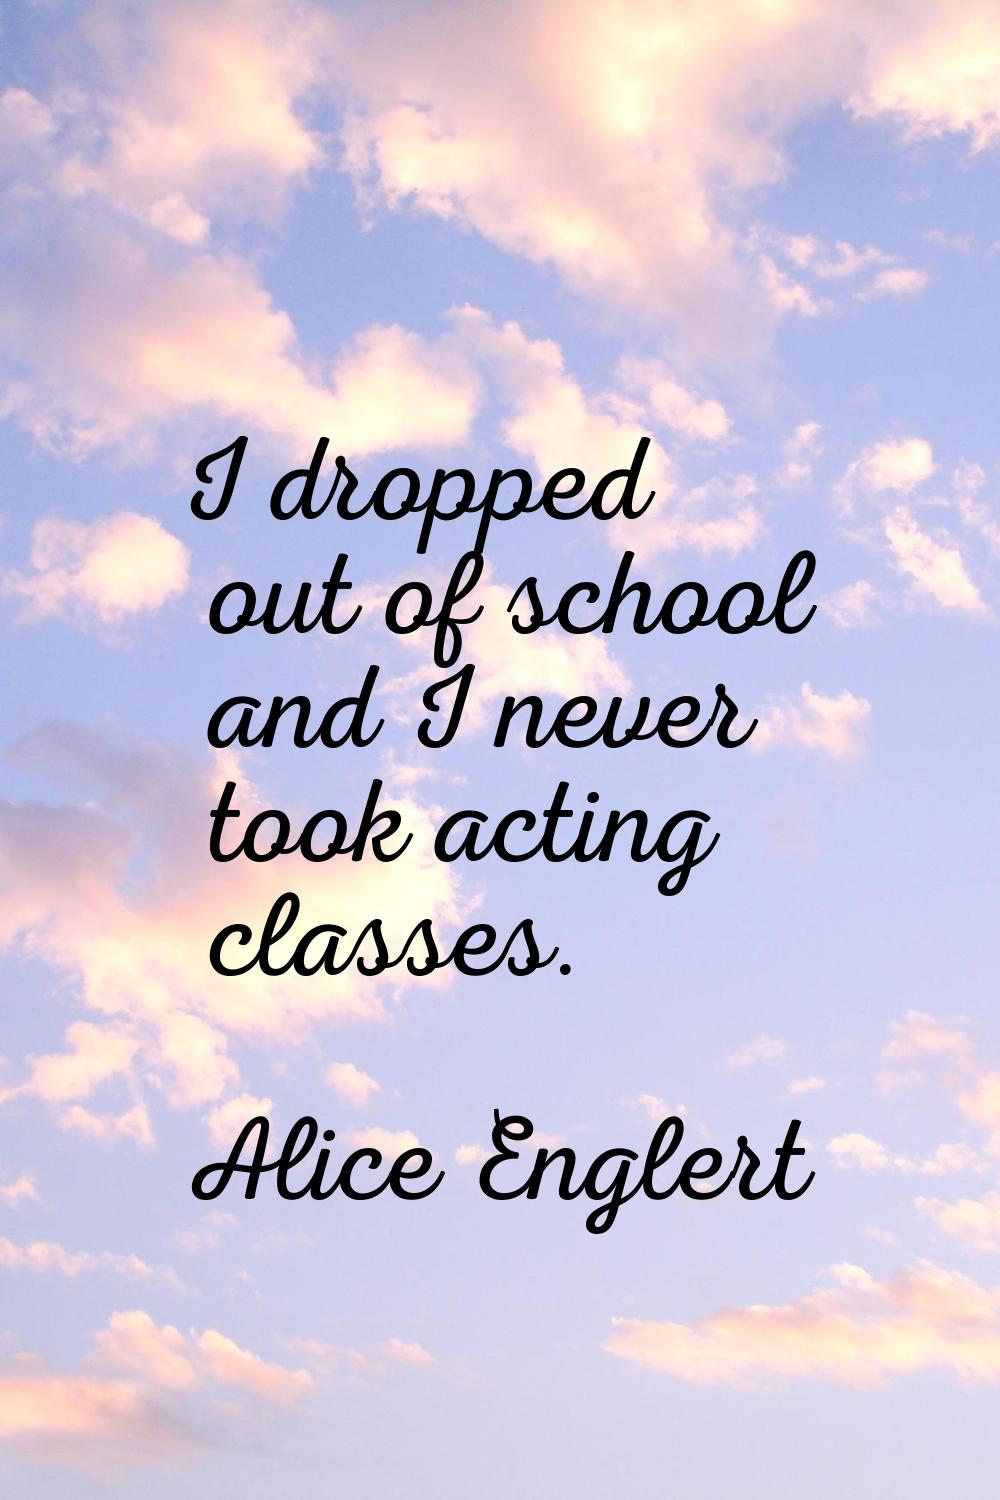 I dropped out of school and I never took acting classes.